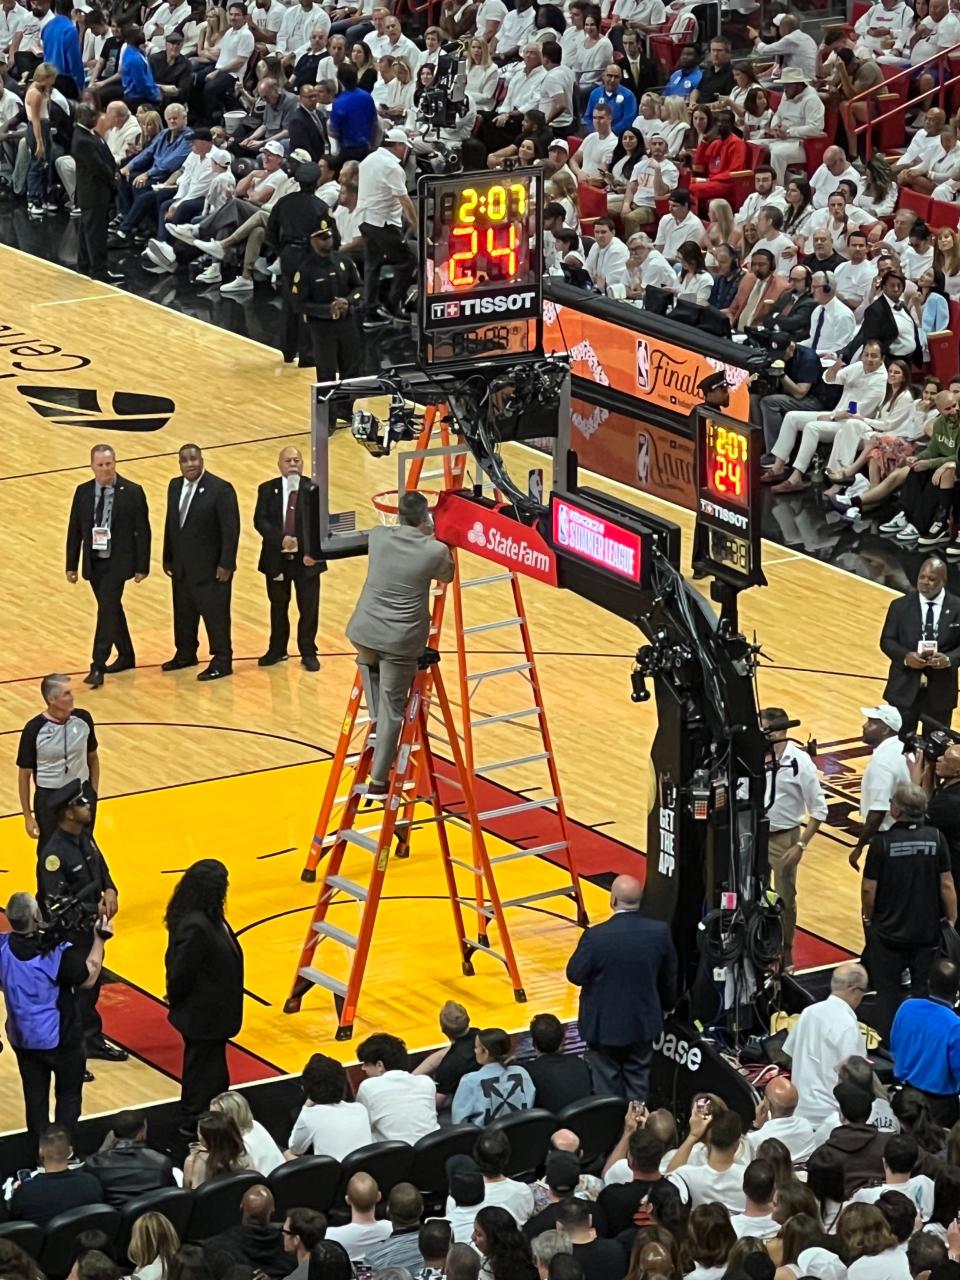 The rim is checked to make sure it is level.